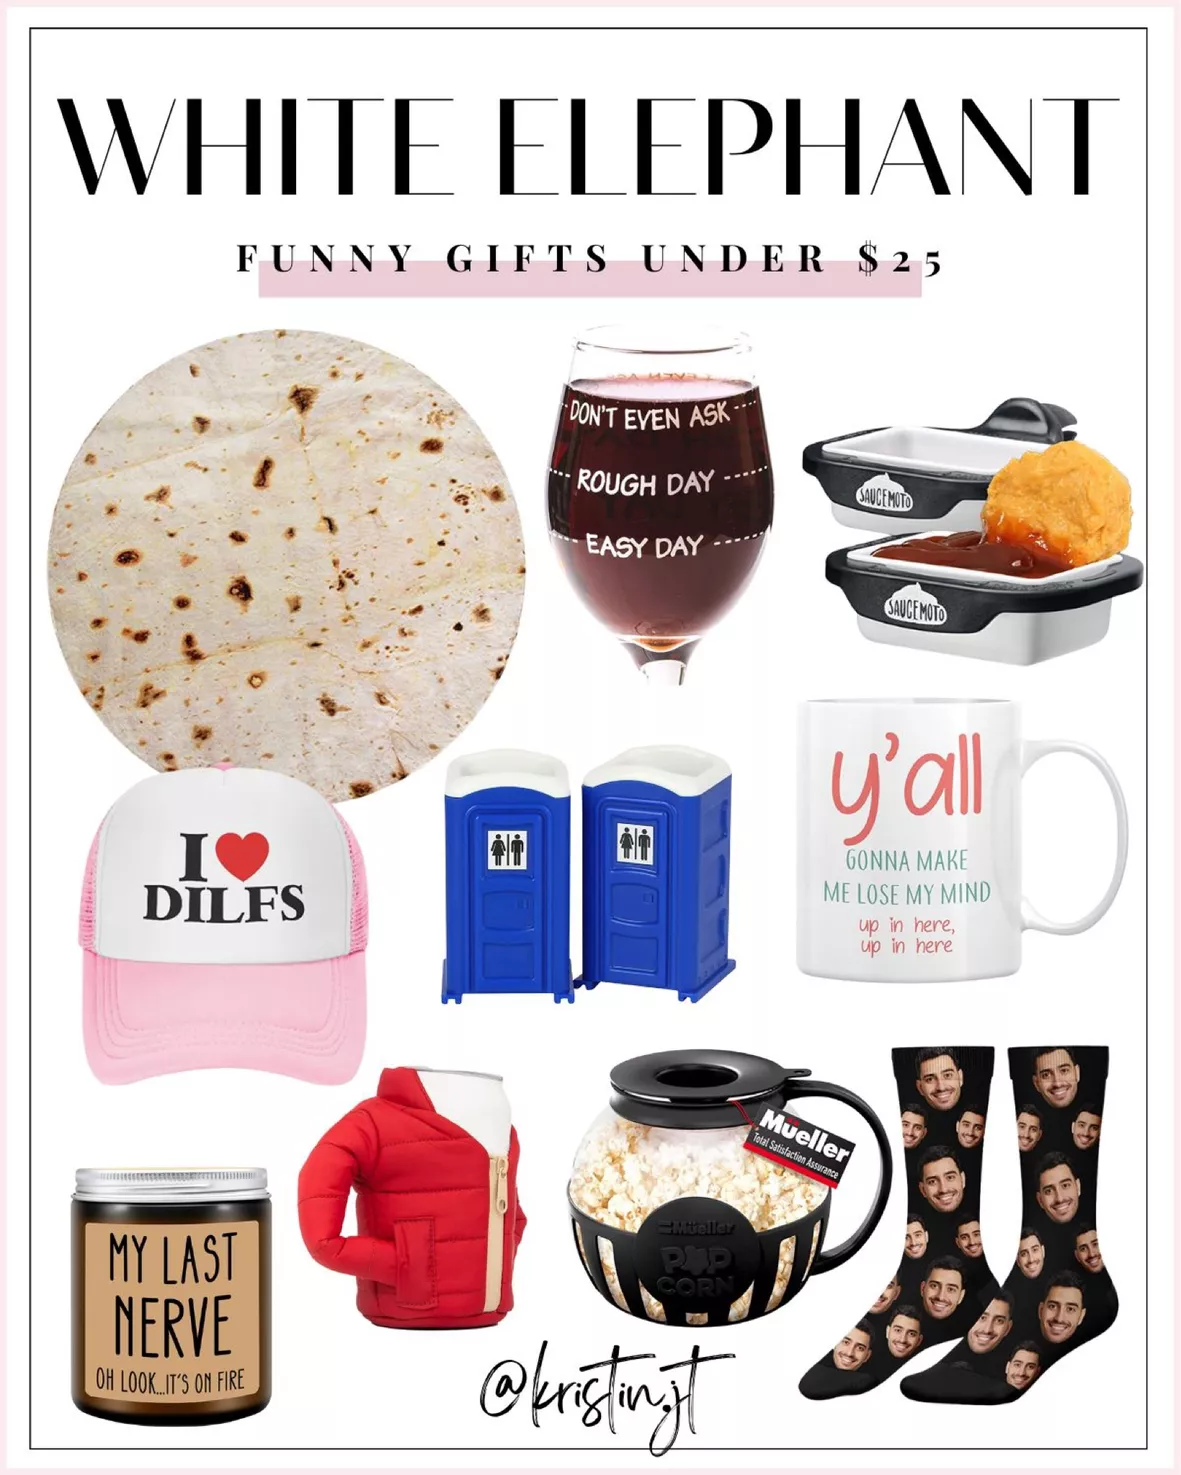 Gift Guide: Quick Gift Ideas for White Elephant and Dirty Santa